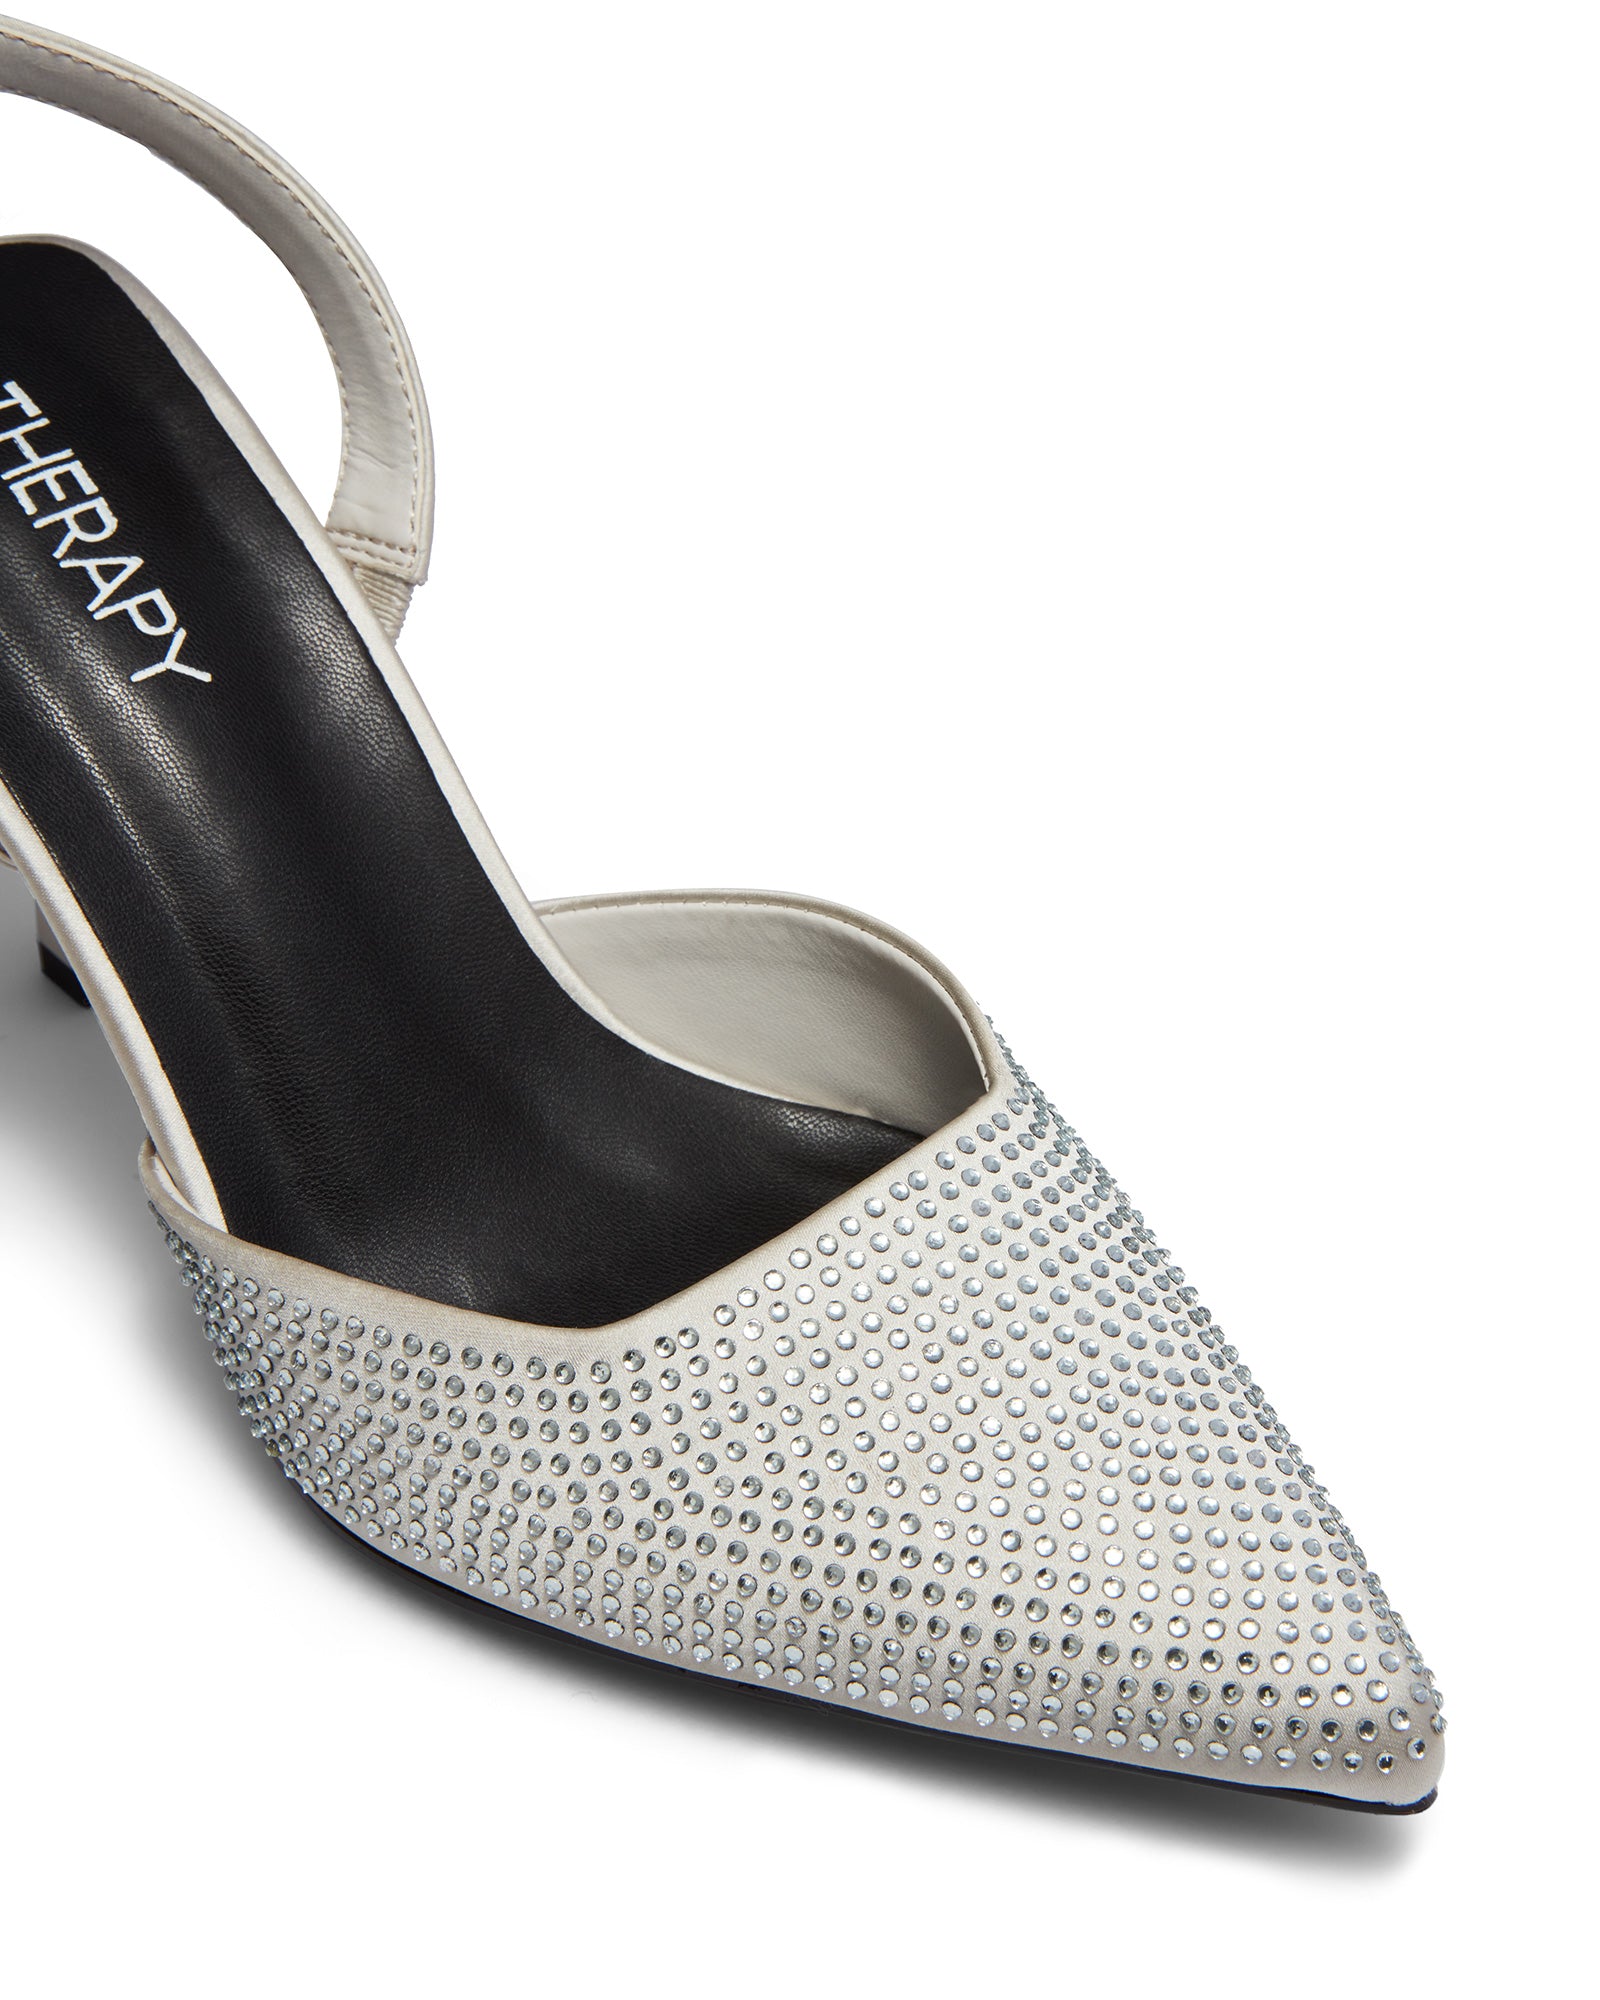 Therapy Shoes Adorn Silver | Women's Heels | Sandals | Stiletto | Slingback